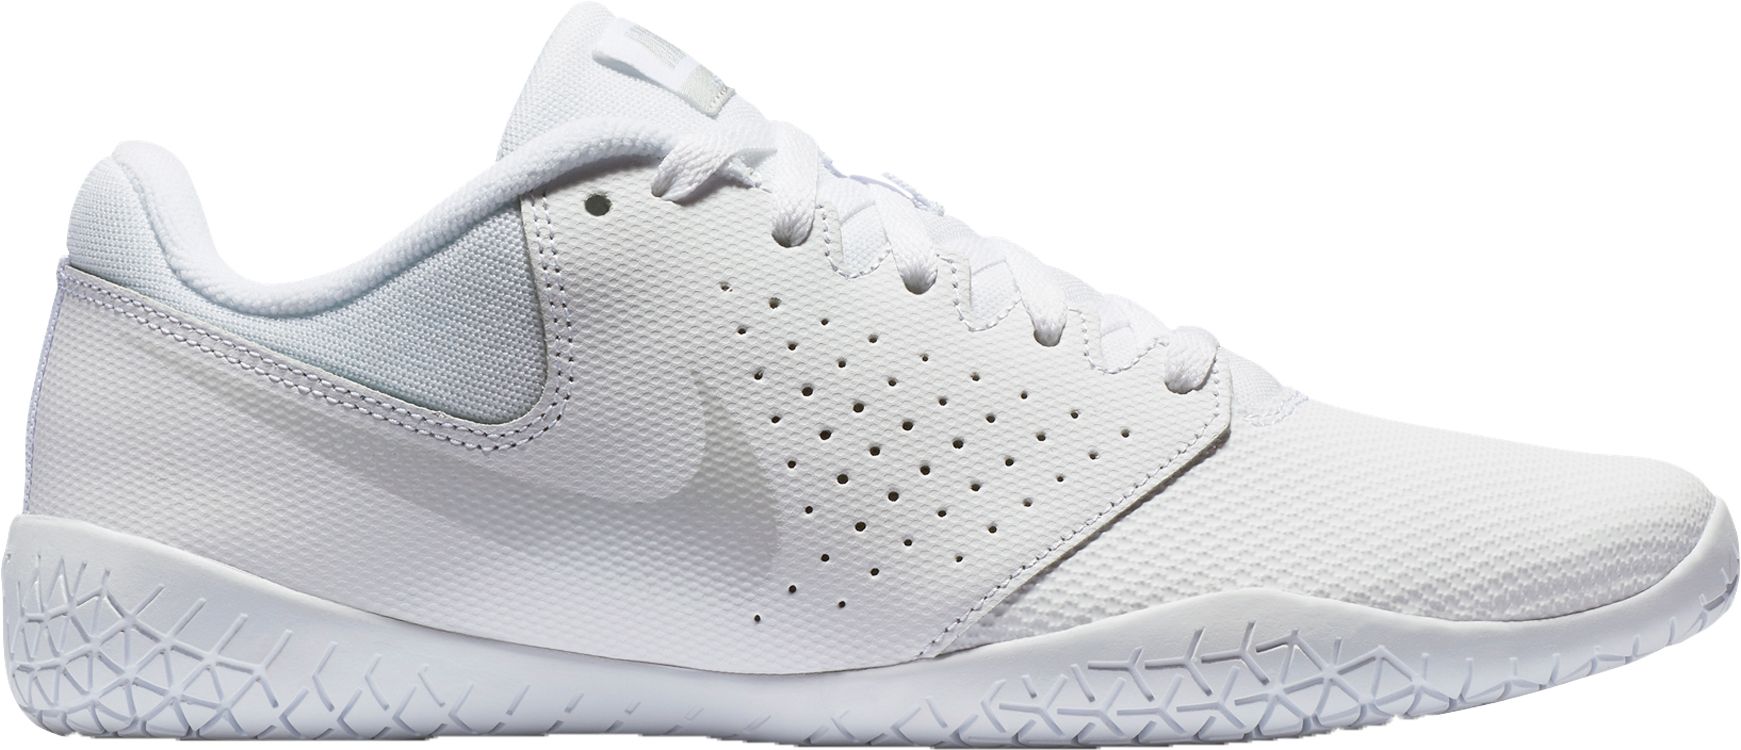 white nike sideline cheer shoes